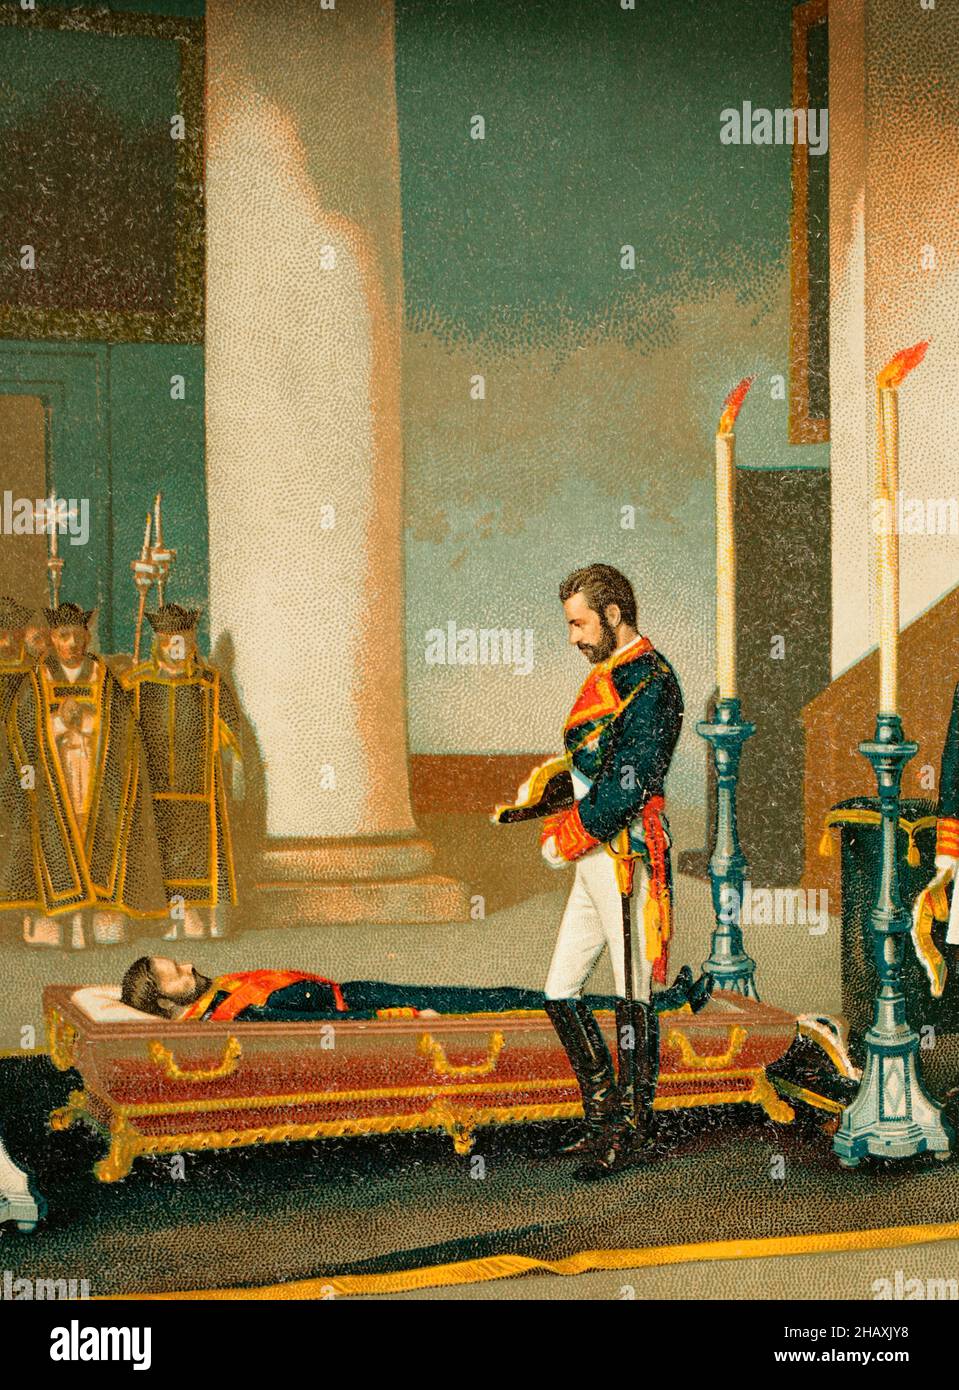 King Amadeo I of Spain (1845-1890) visiting the corpse of General Prim (1814-1870). Scene of the monarch at the Basilica of Atocha (Madrid) paying last respects to Prim, on 2 January 1871, who was assassinated in an attack on 27 December 1870. Copy of the painting by Antonio Gisbert. Detail. Chromolithography. 'Historia General de España' (General History of Spain), by Miguel Morayta. Volume VIII. Madrid, 1894. Stock Photo